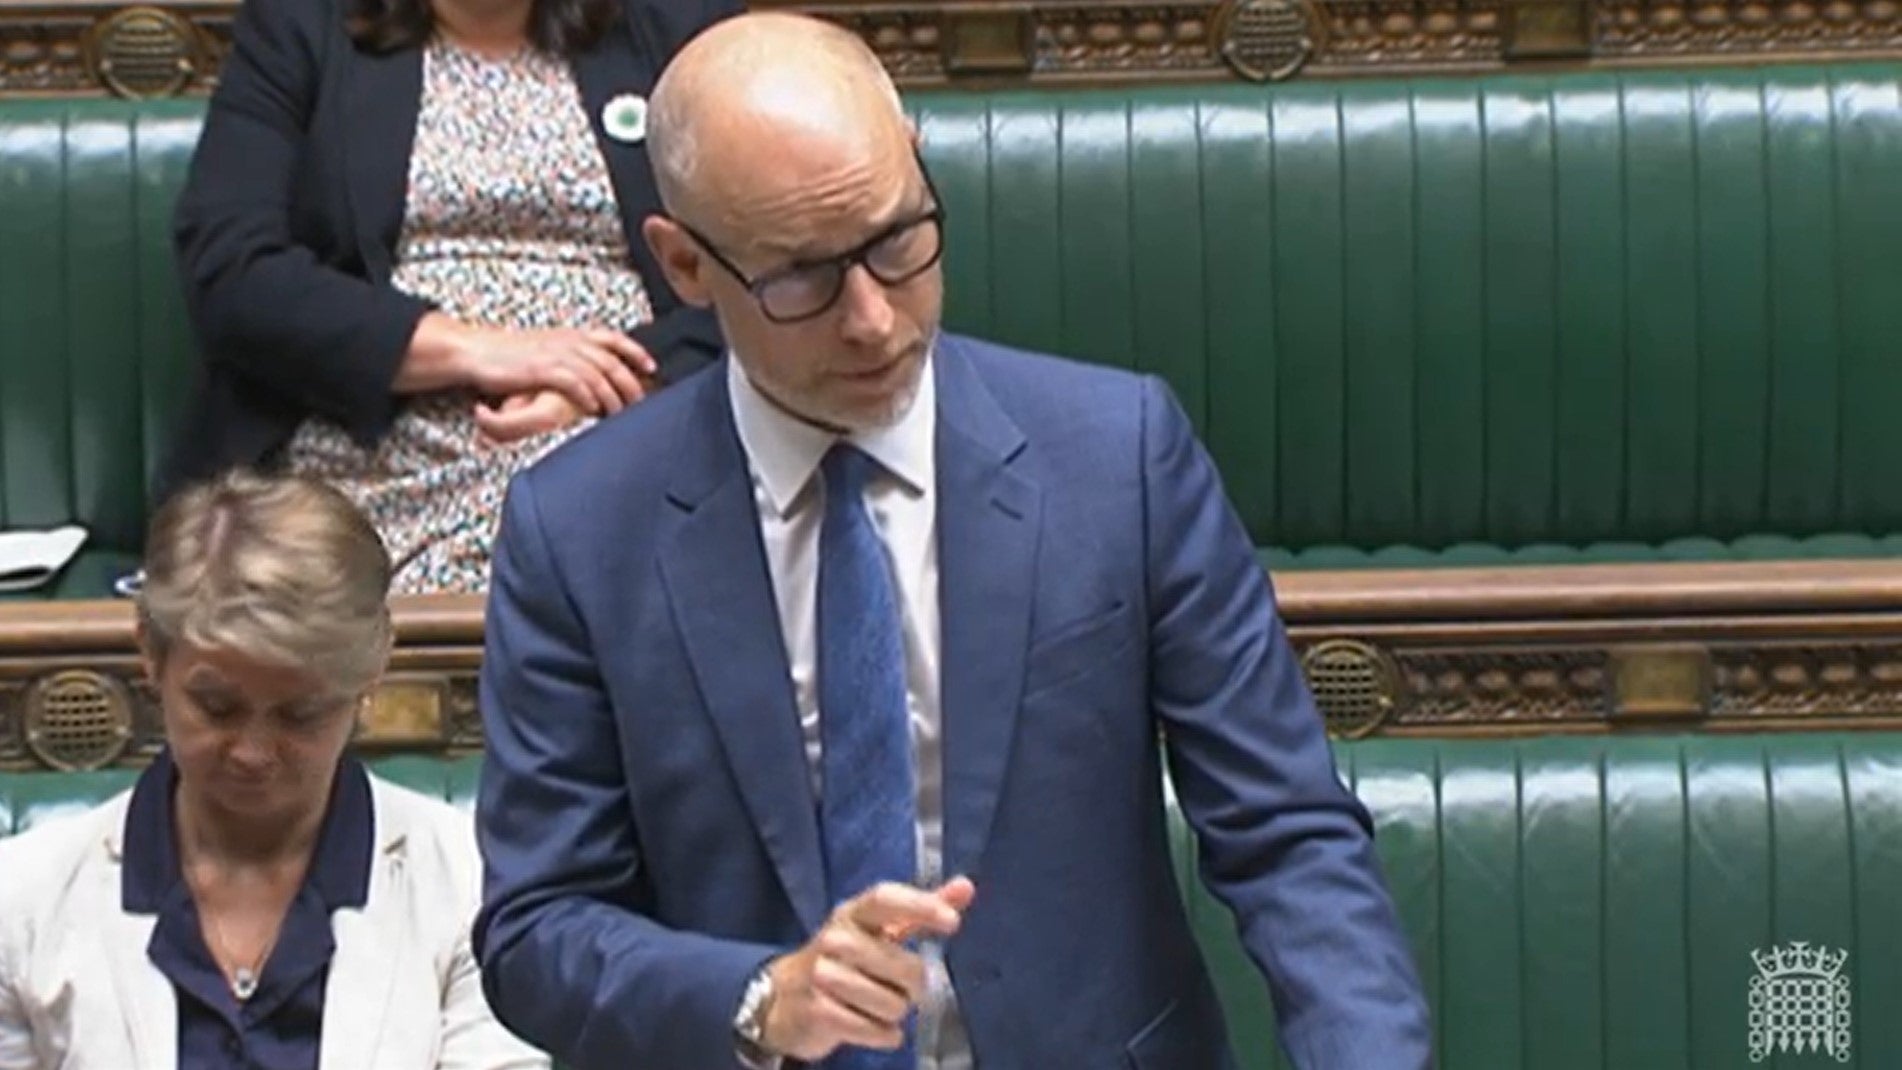 Stephen Kinnock said it is a ‘moral imperative’ for the government to ensure Afghan heroes are not put on Rwanda deportation flights